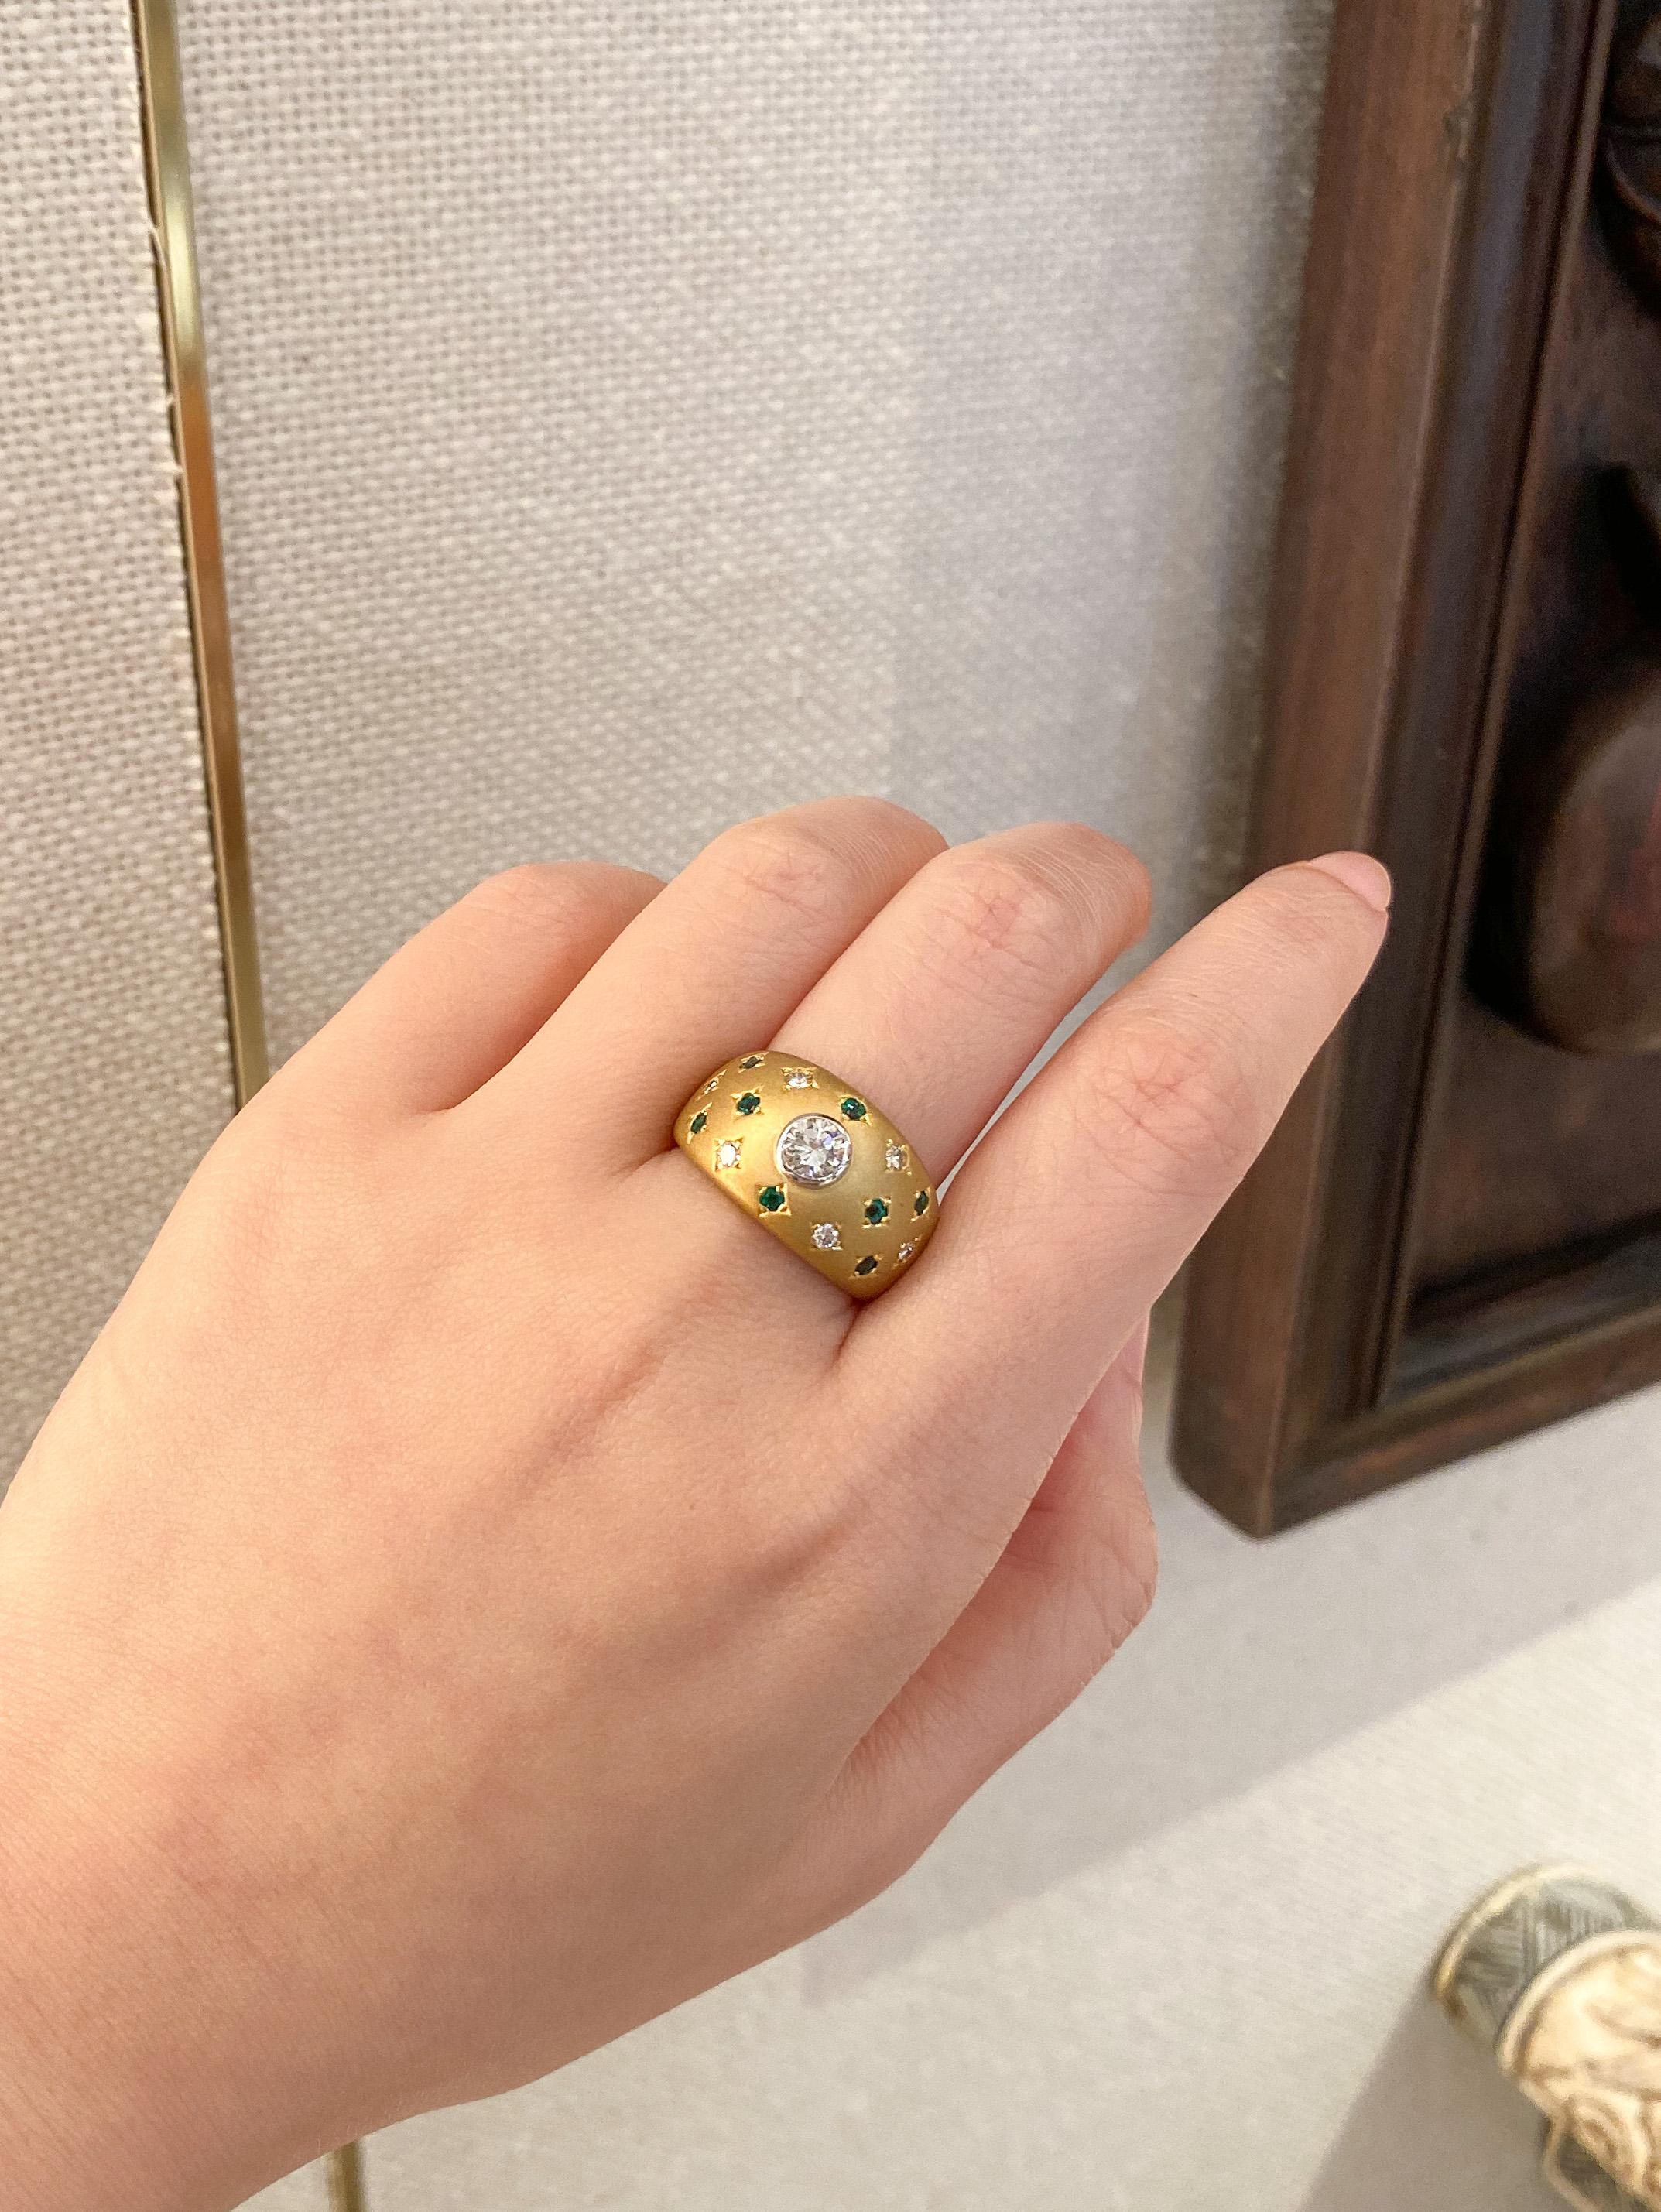 The design behind this classic yet eye-catching band ring was inspired by the beautiful starry nights that Dilys’ creative director and designer, Ms. Dilys Young, experienced on her travels to Nepal many years ago. This 18 karat gold ring with matte